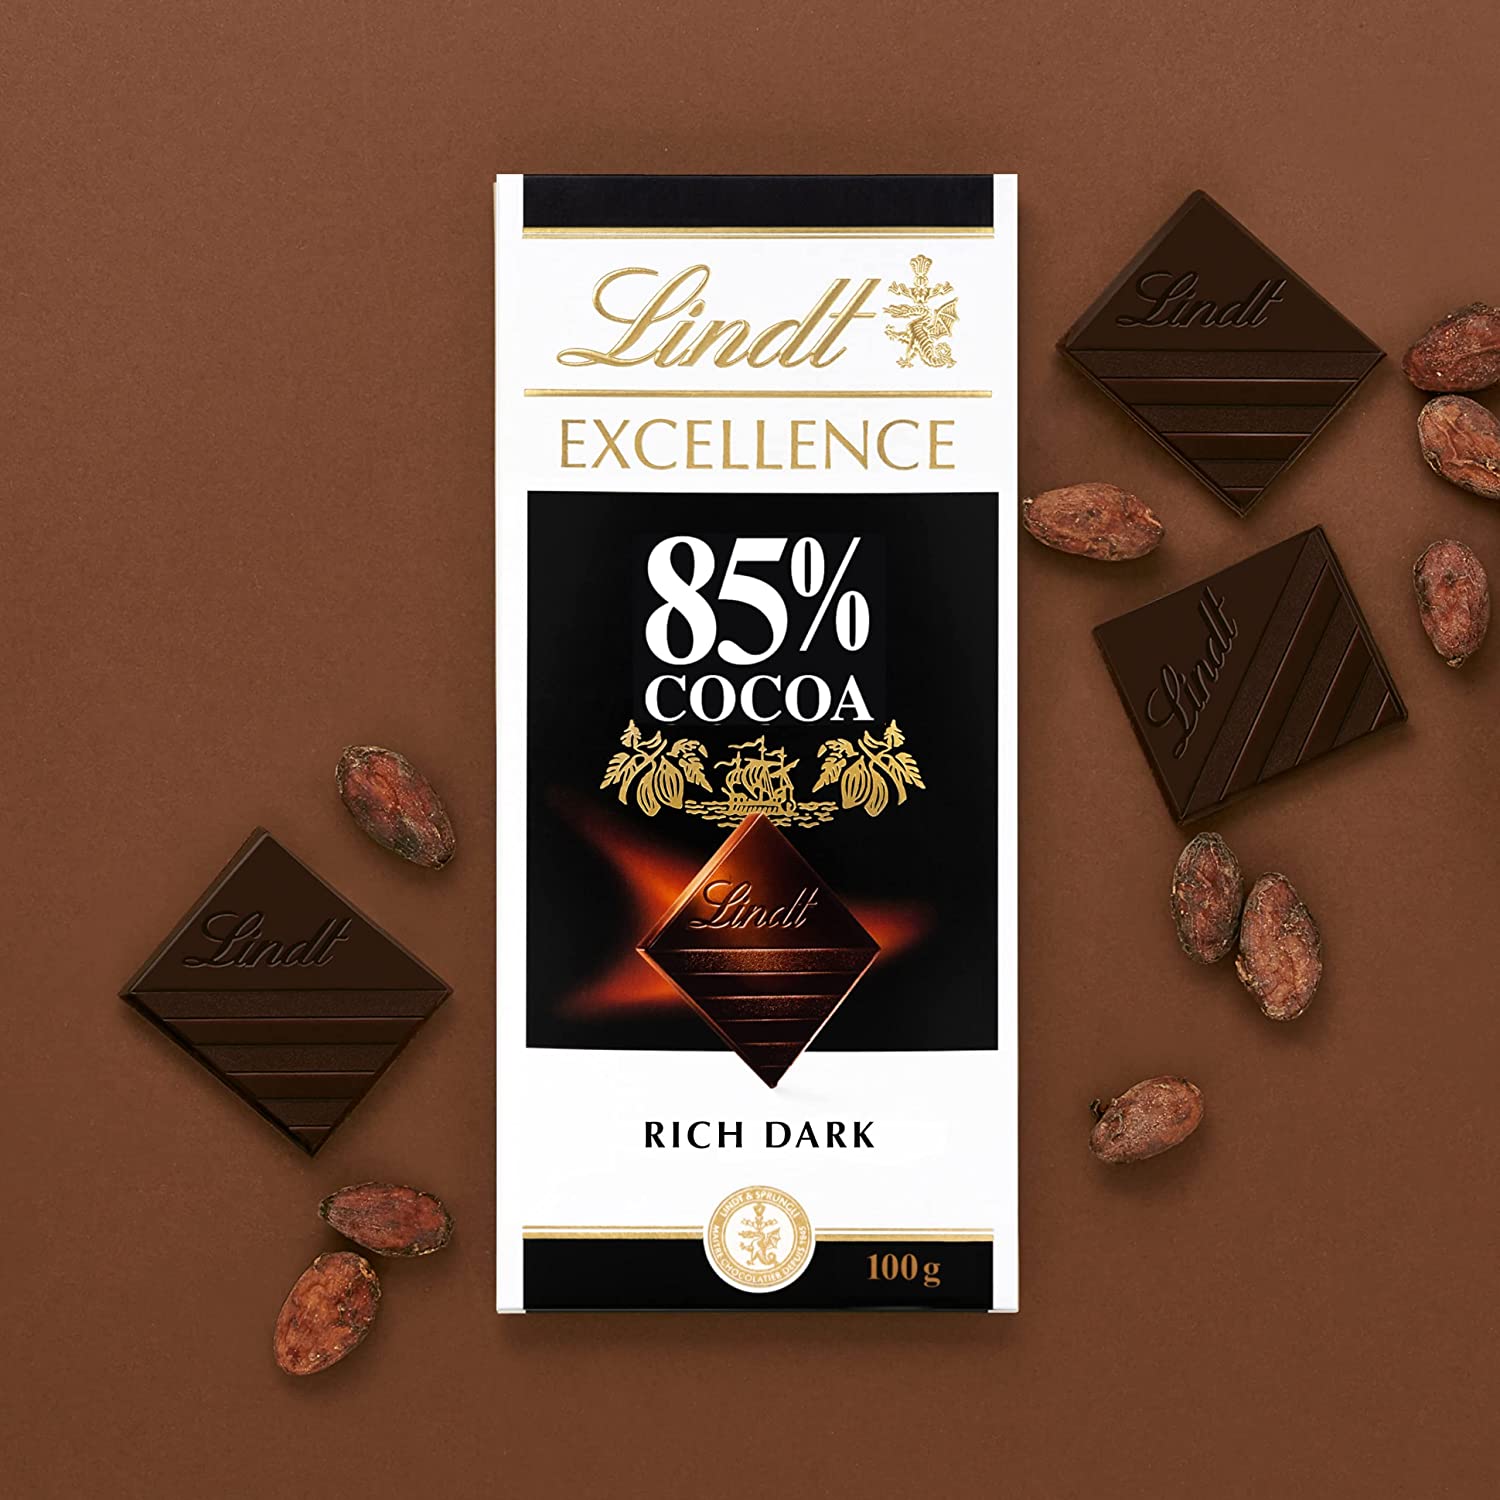 Lindt Excellence 85% Cocoa Bar 100g – Cococart India